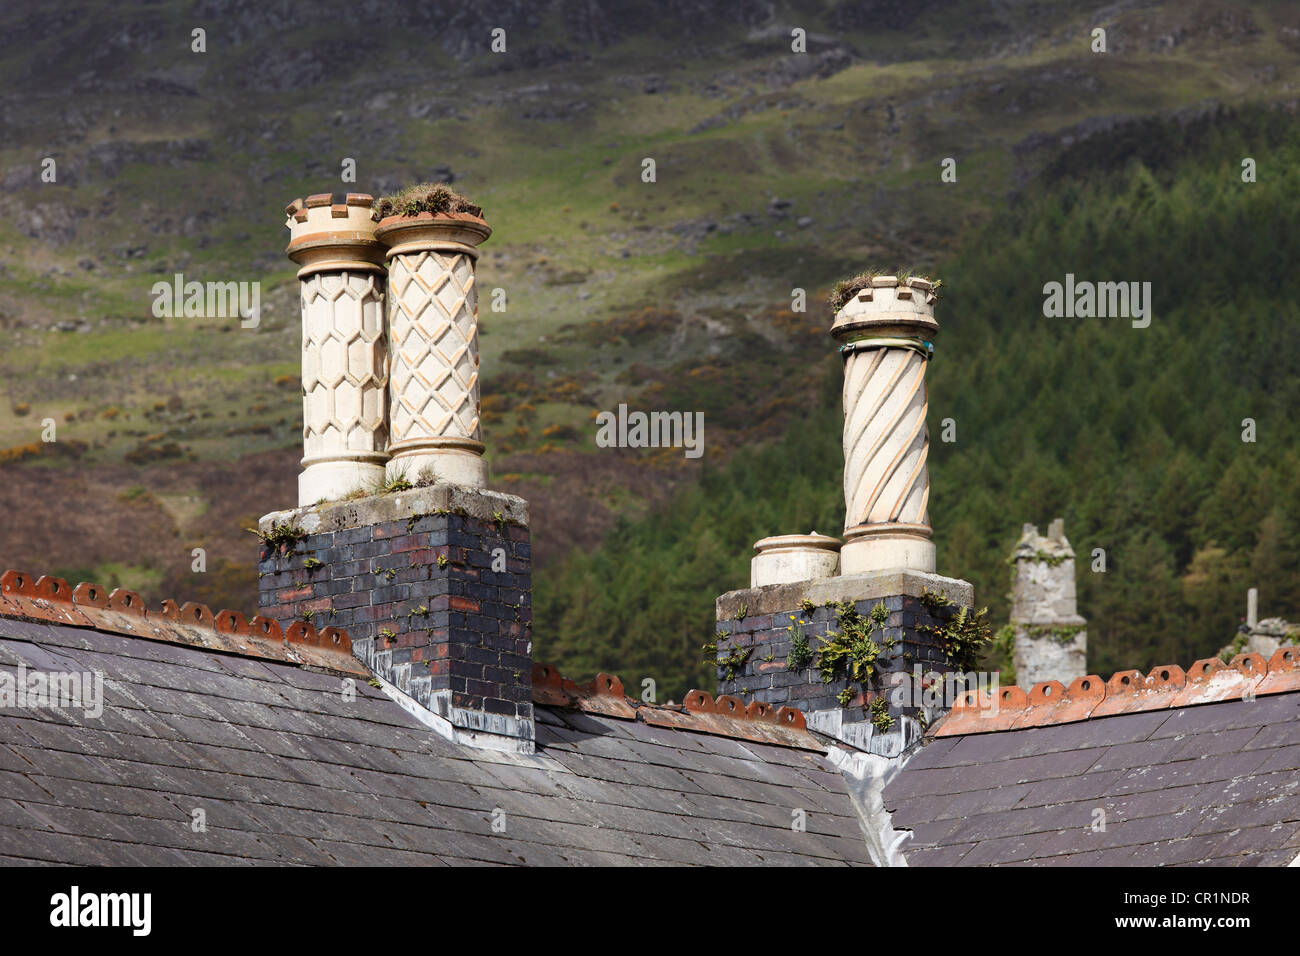 Ornate fireplaces, Carlingford, County Louth, Republic of Ireland, Europe Stock Photo